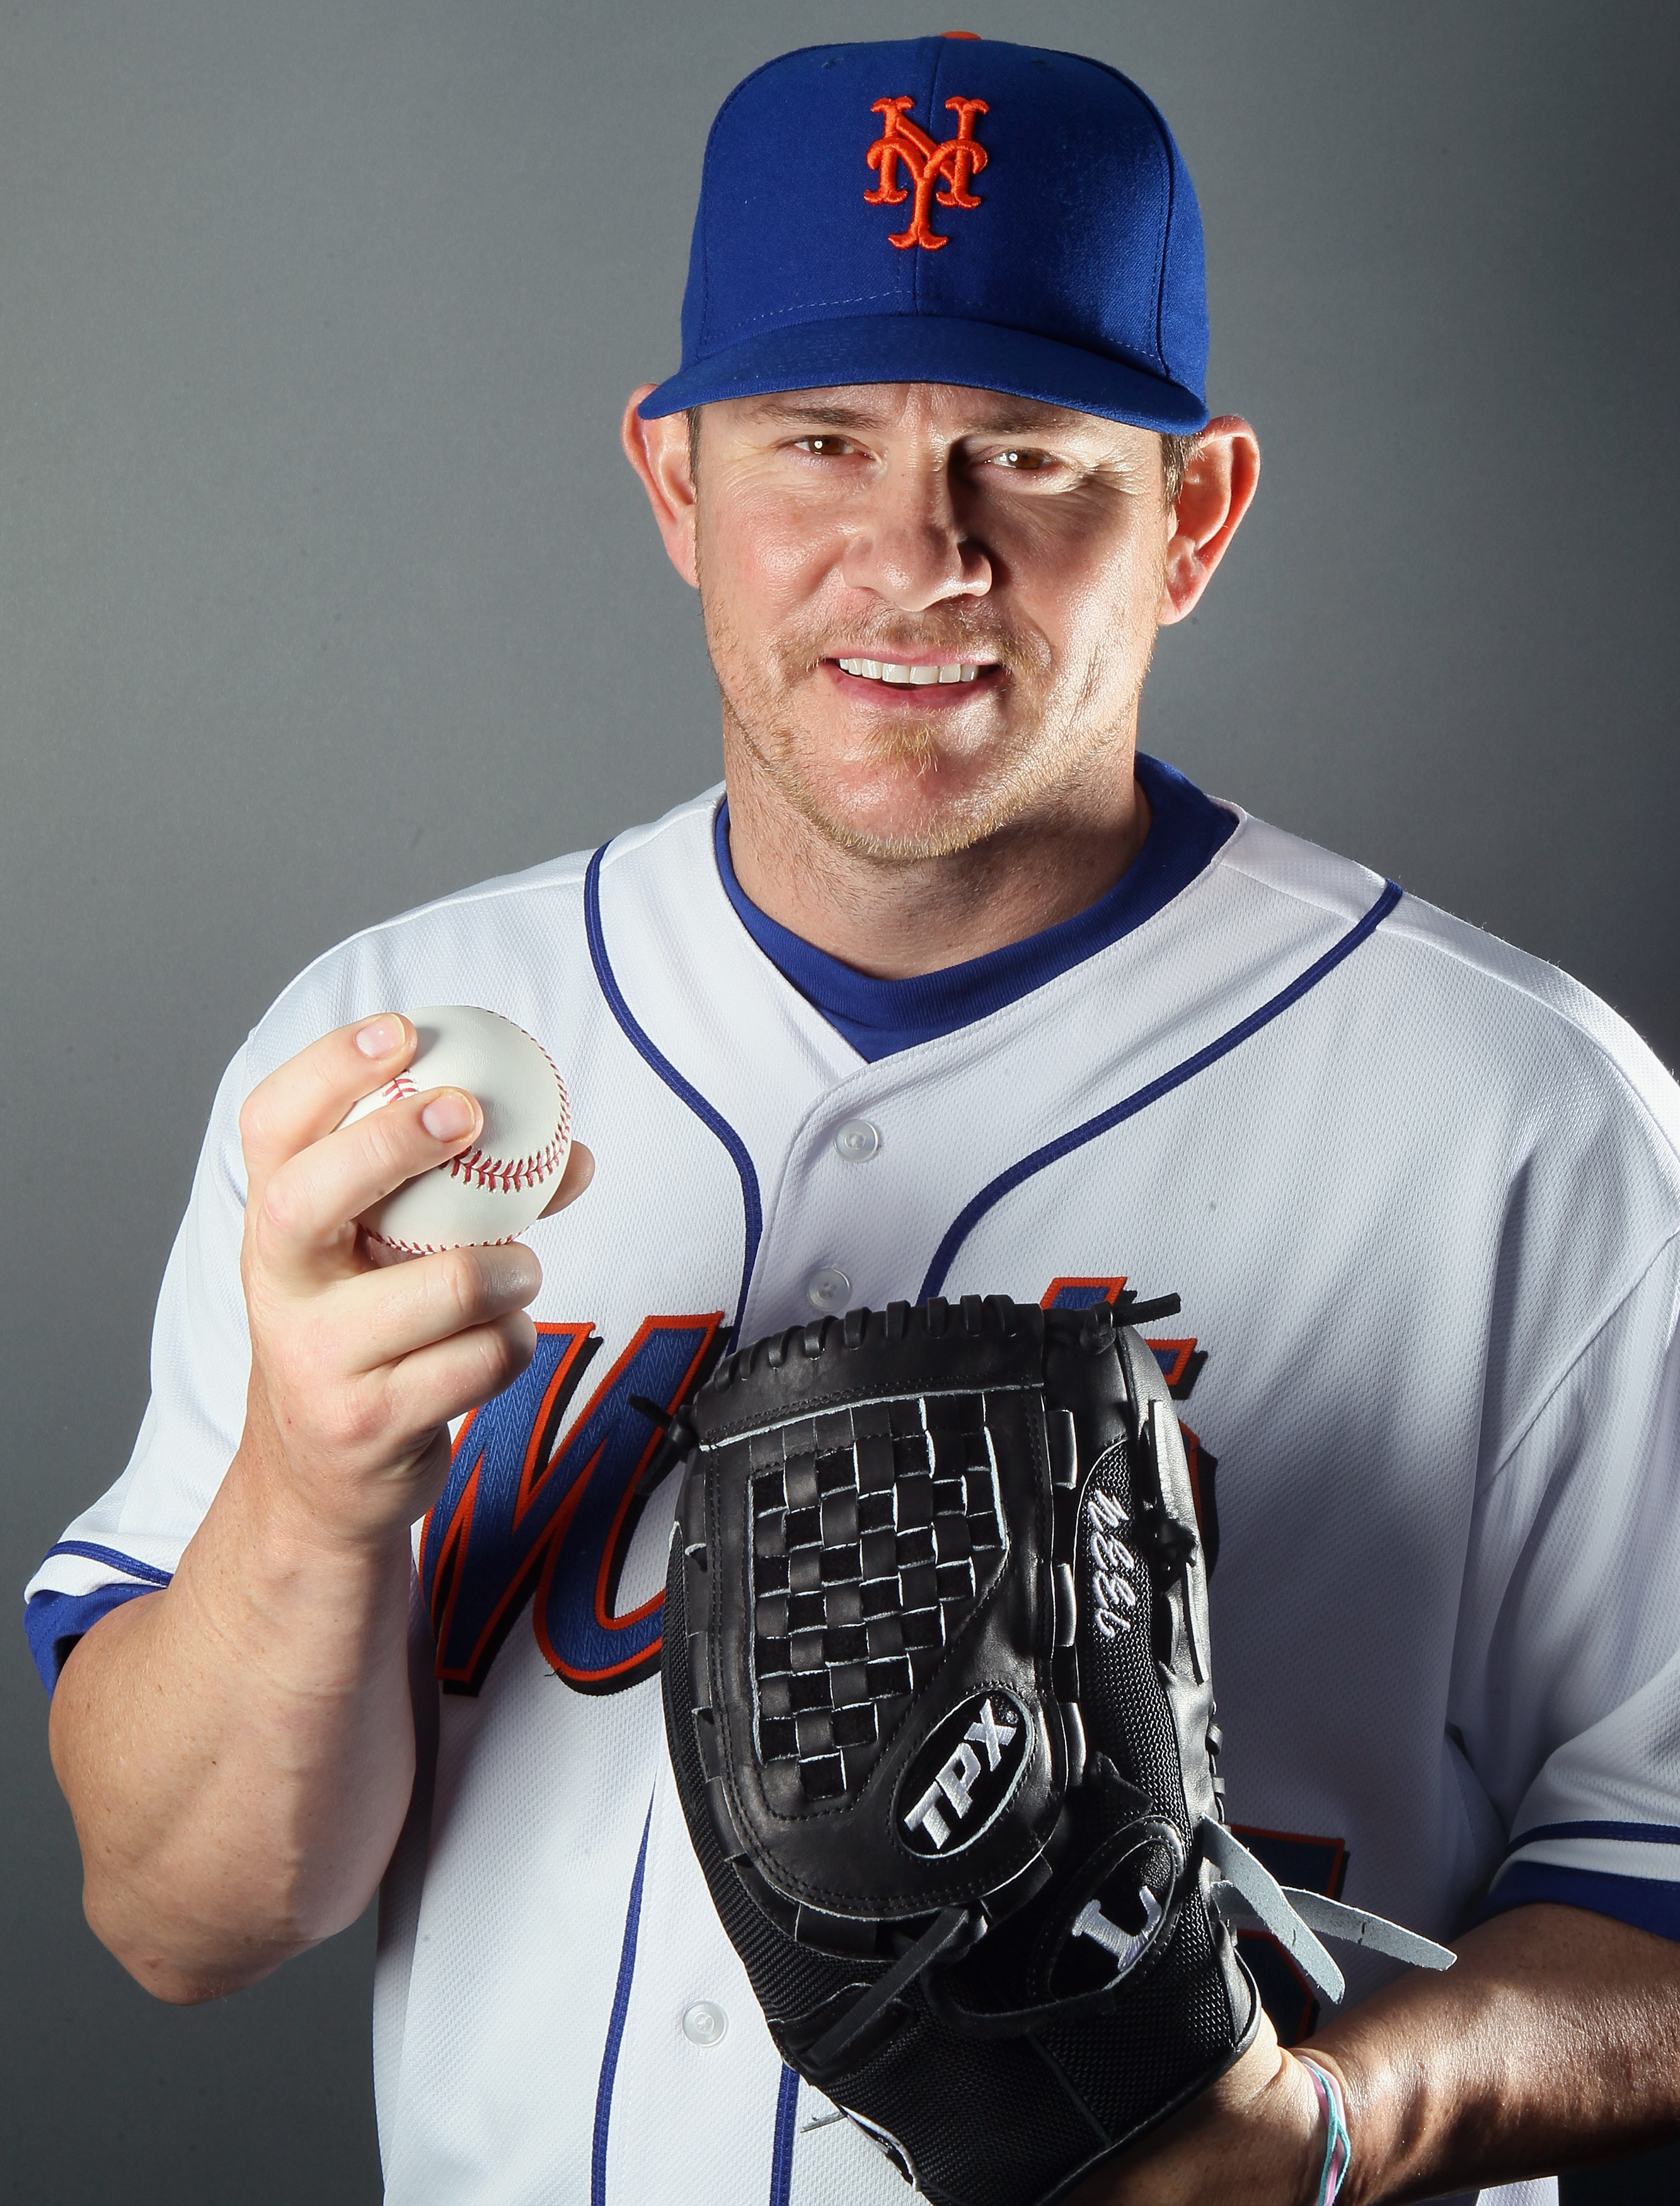 PORT ST. LUCIE, FL - FEBRUARY 24:  RY 24:  Jason Isringhausen #45 of the New York Mets poses for a portrait during the New York Mets Photo Day on February 24, 2011 at Digital Domain Park in Port St. Lucie, Florida.  (Photo by Elsa/Getty Images)